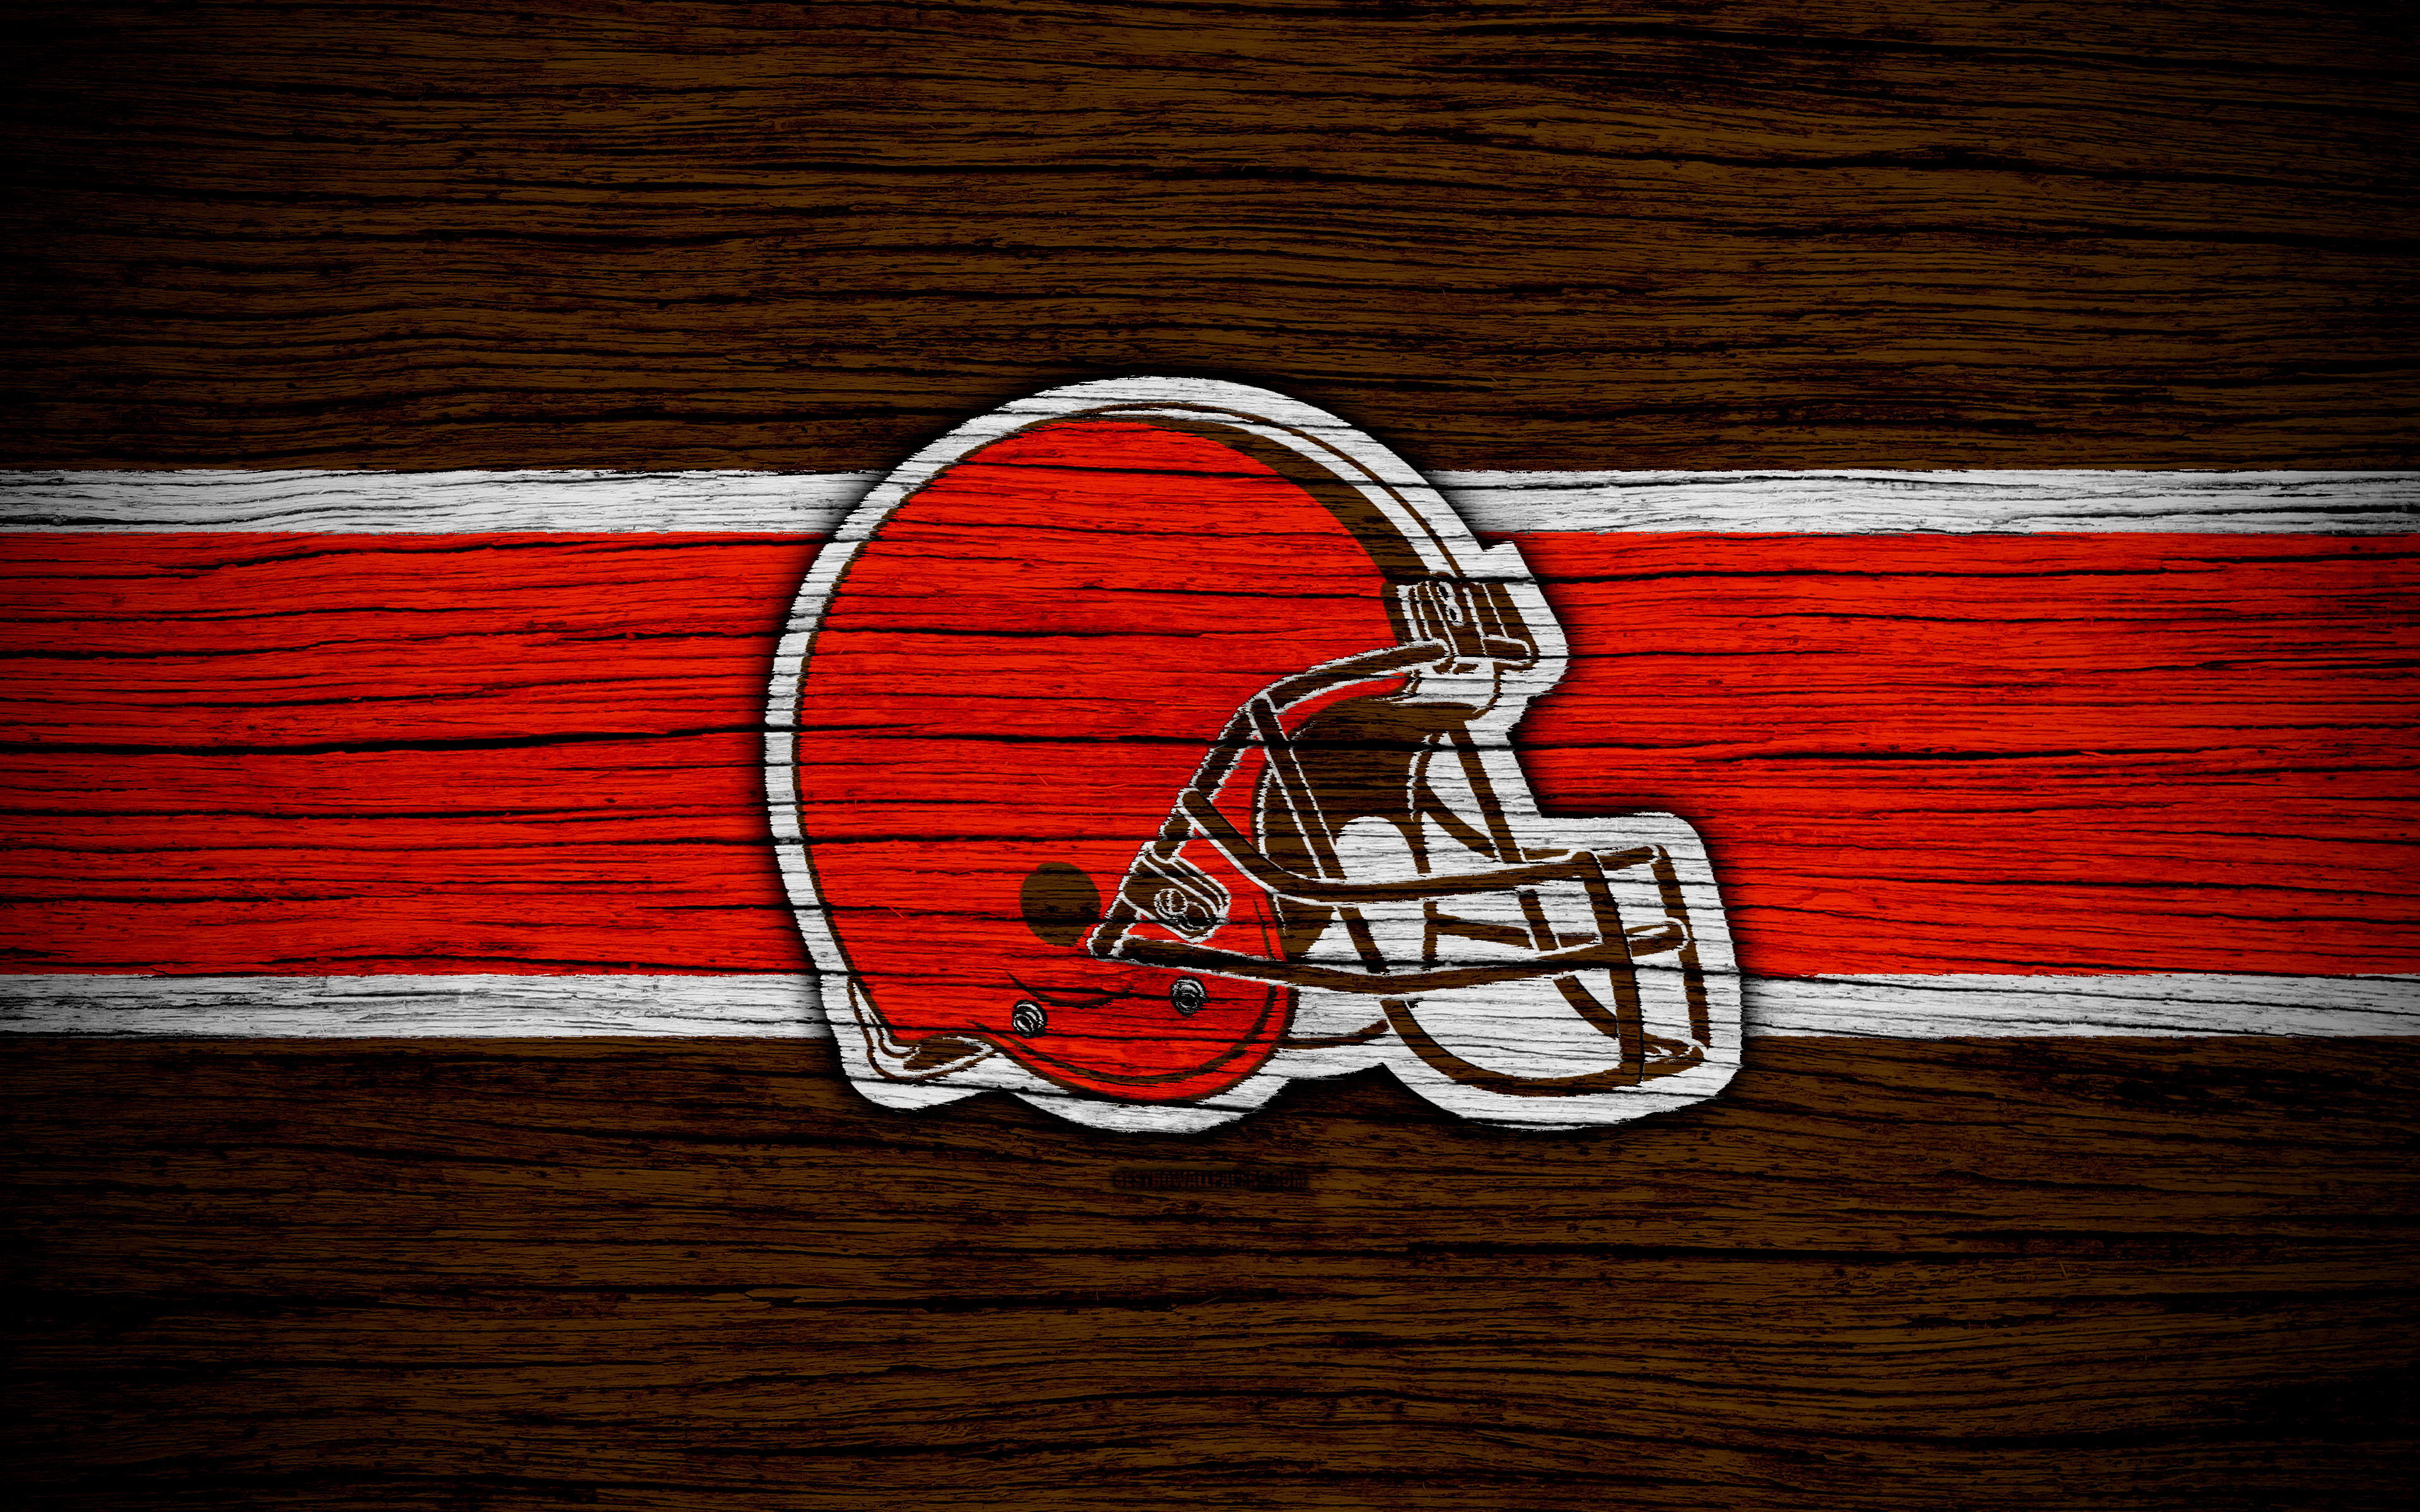 Cleveland Browns, Nfl, 4k, Wooden Texture, American - Logos And Uniforms Of The New York Jets - HD Wallpaper 